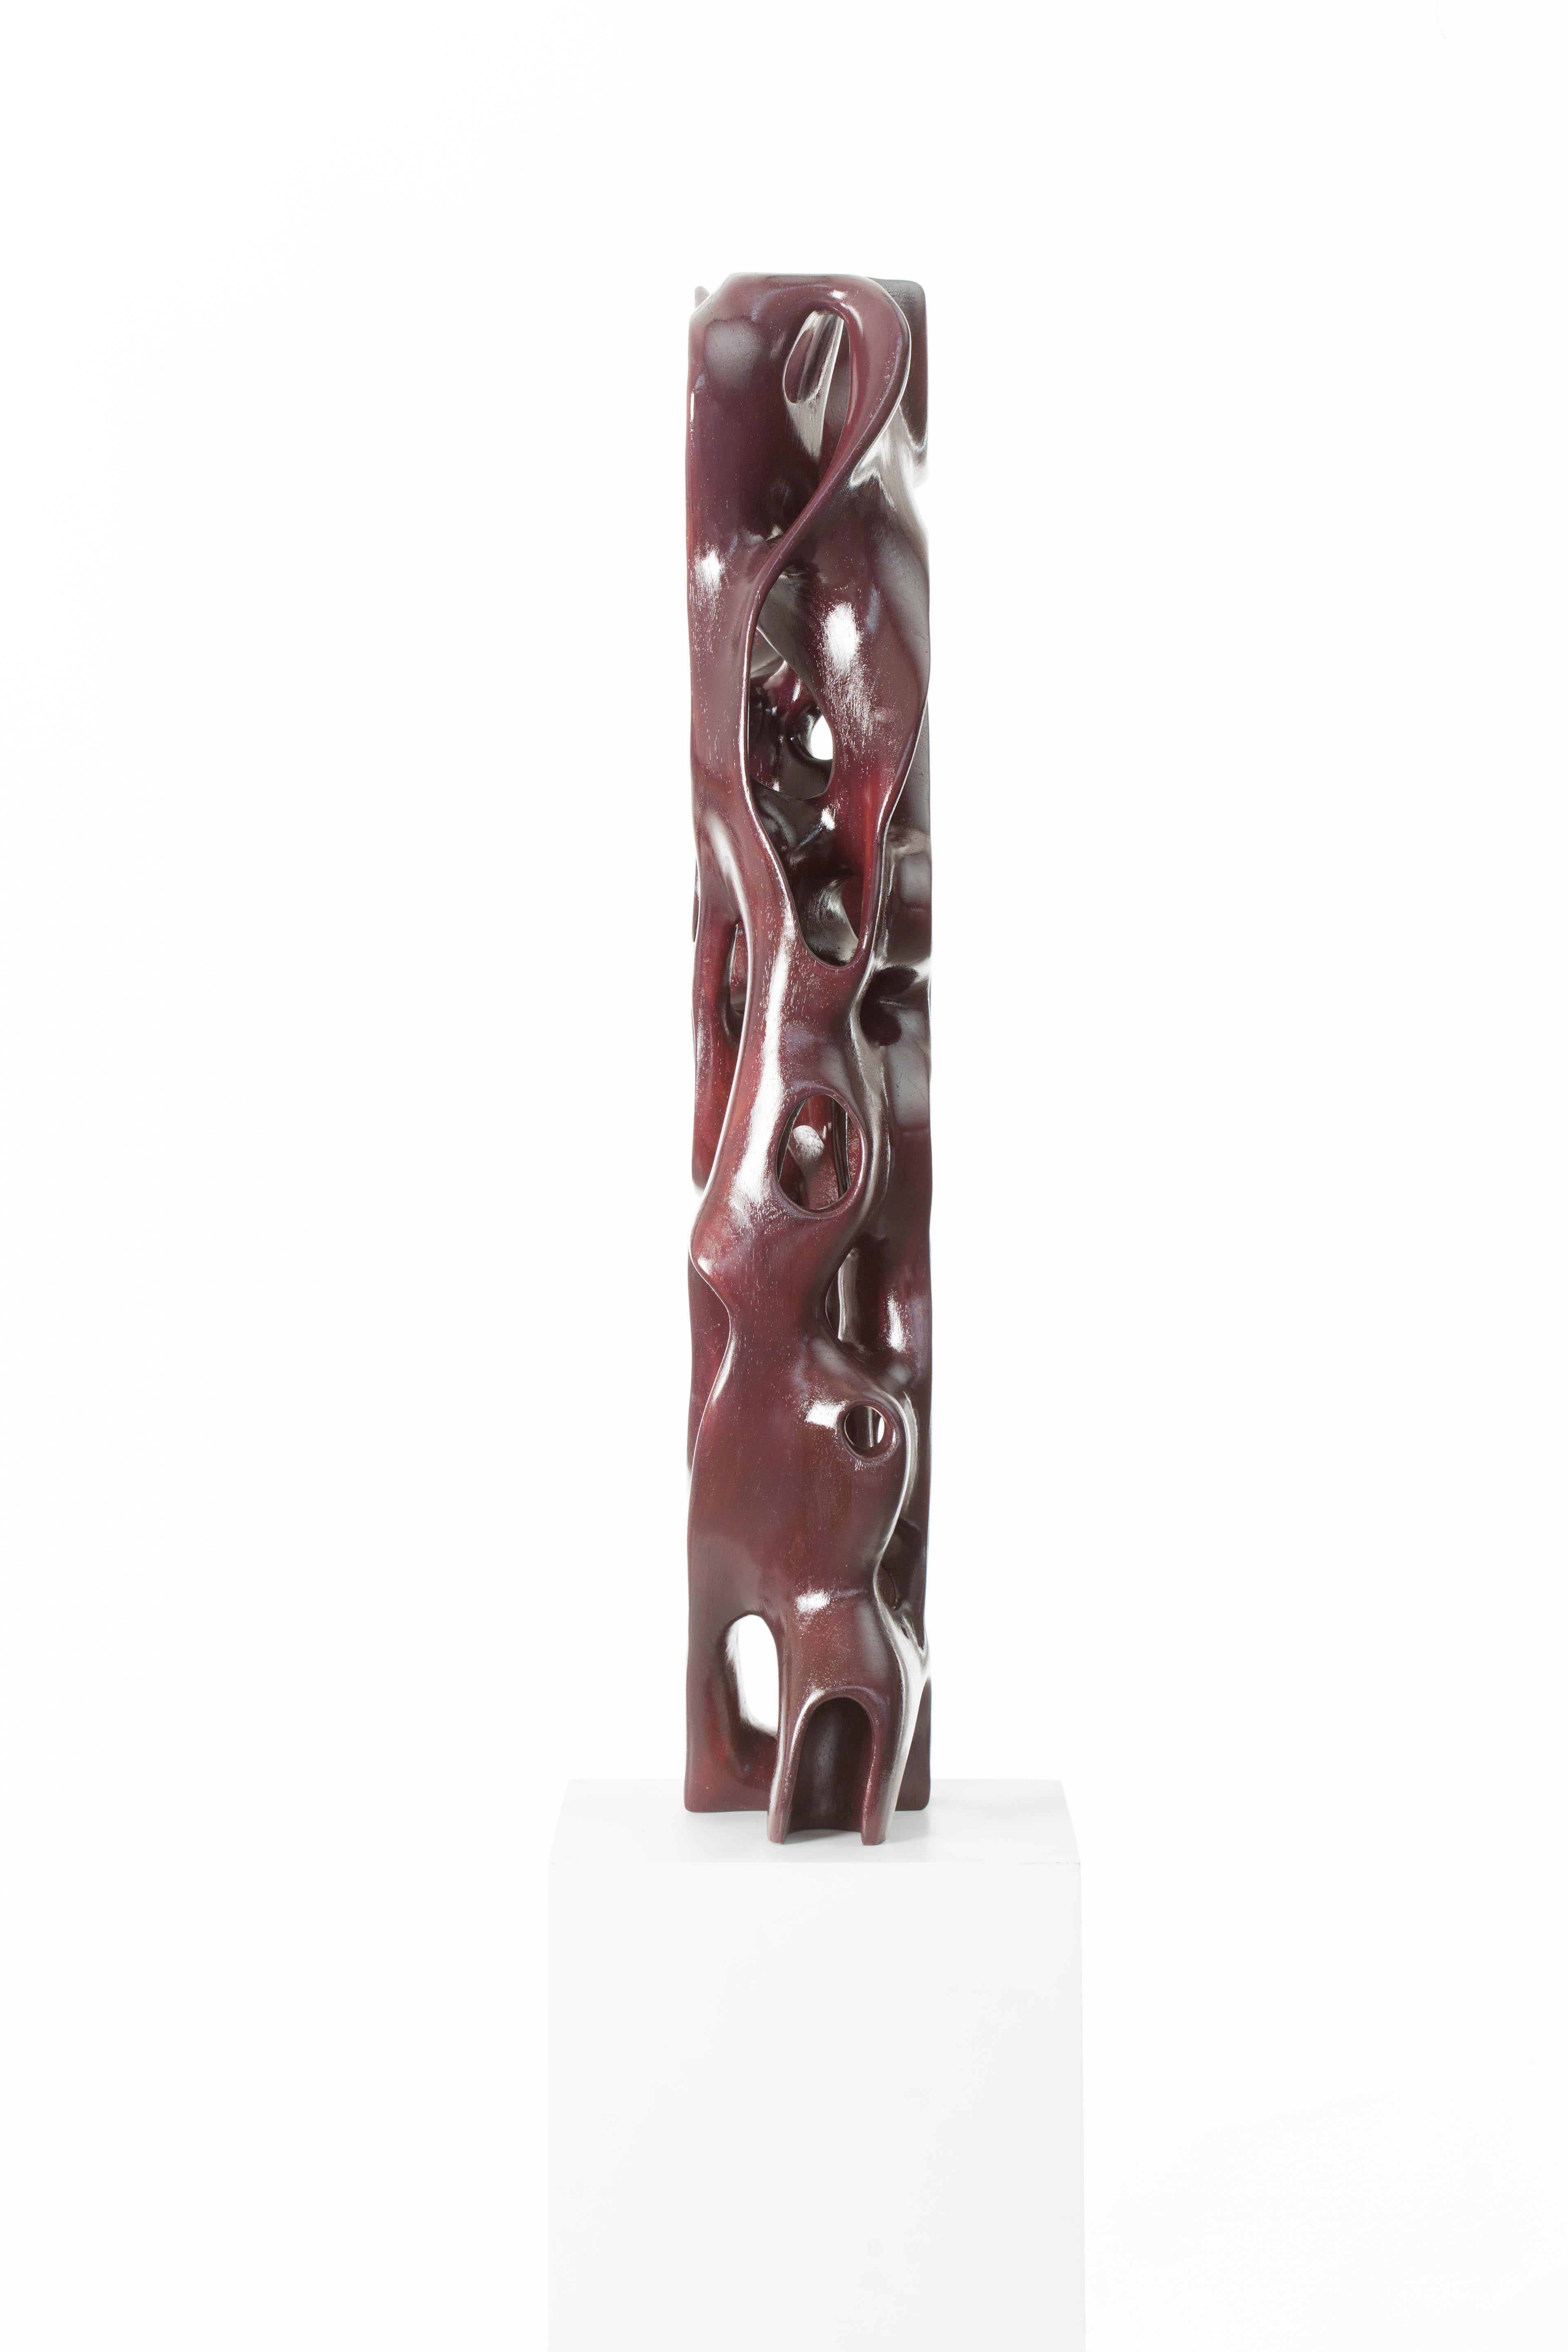 Post-Modern You Can Lean on Me Sculpture by Driaan Claassen For Sale